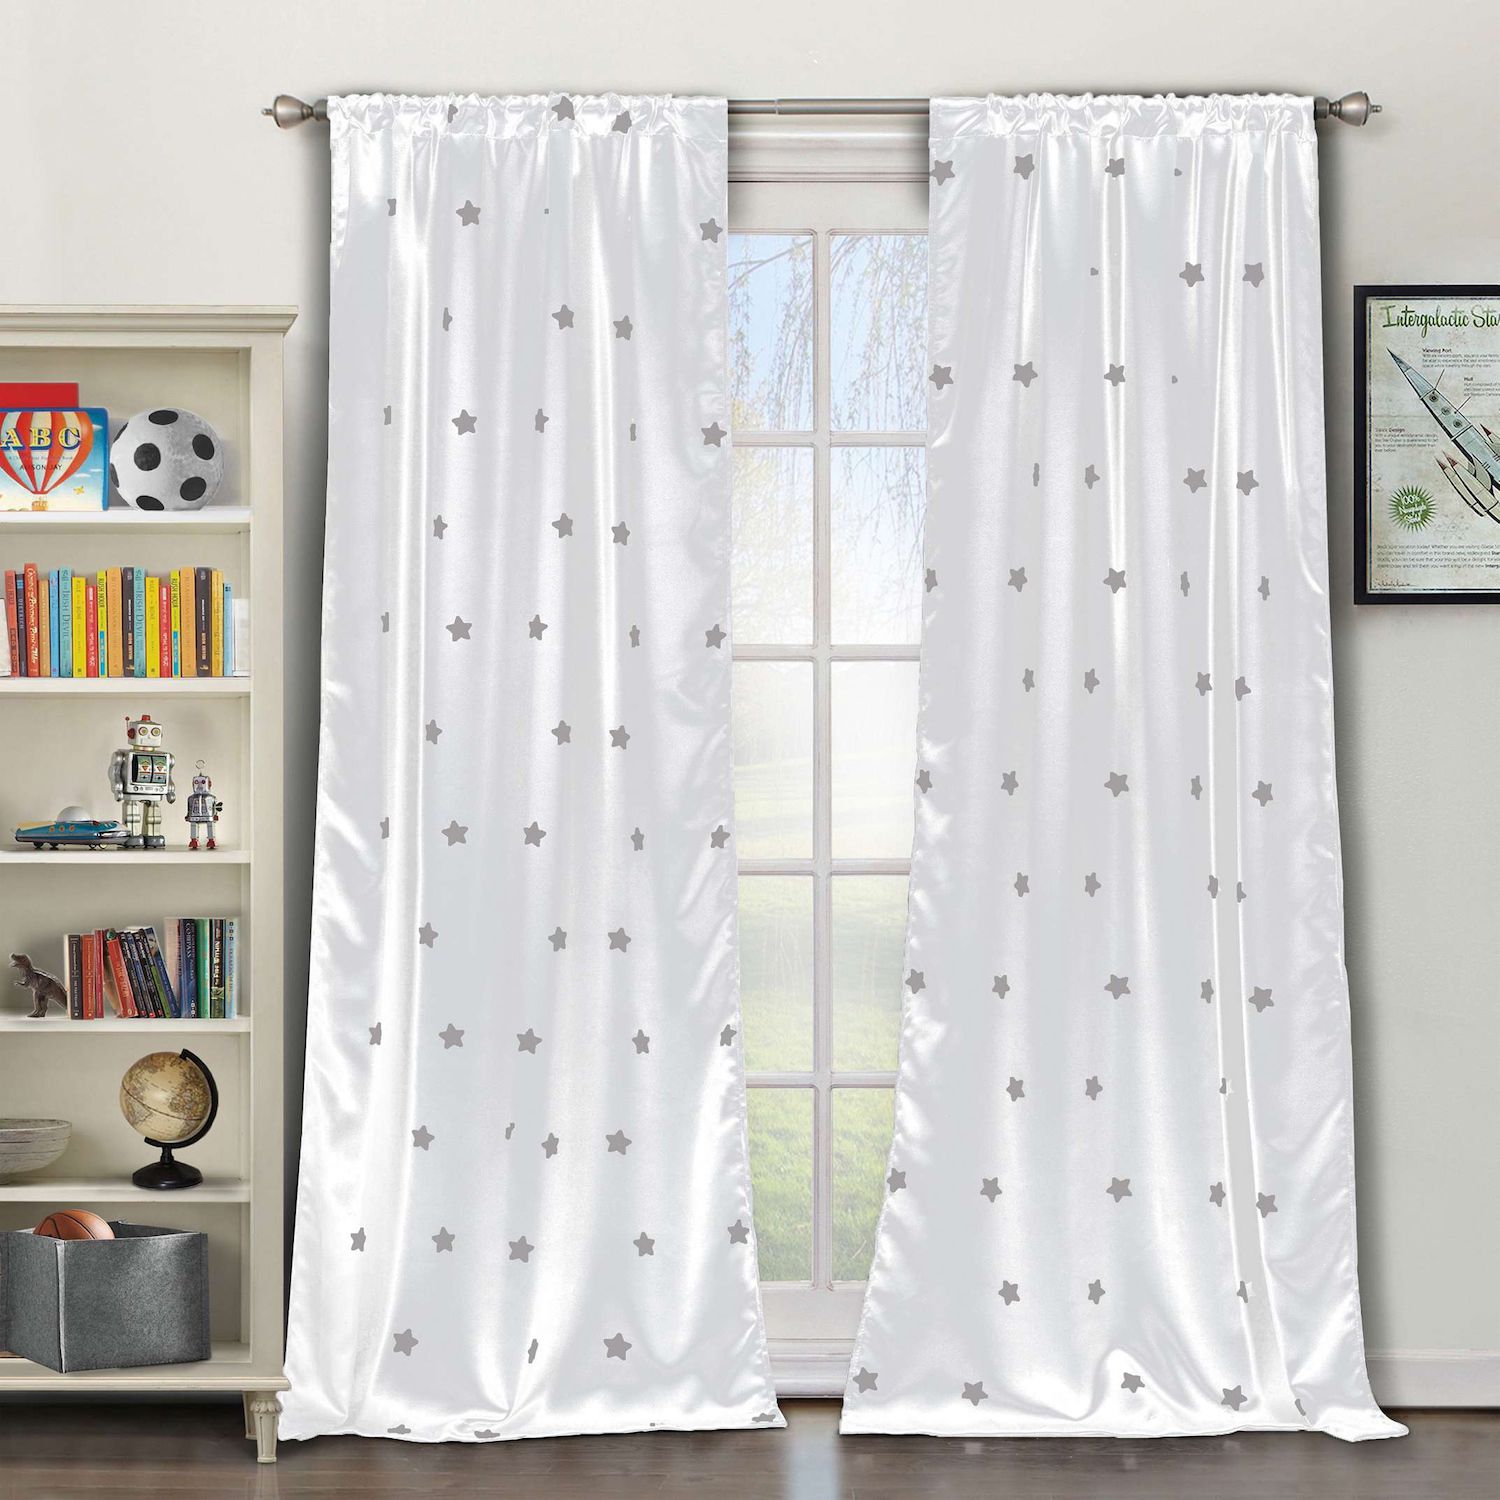 Image for Duck River Textile Gruden Stars 2-pack Window Curtain Set at Kohl's.